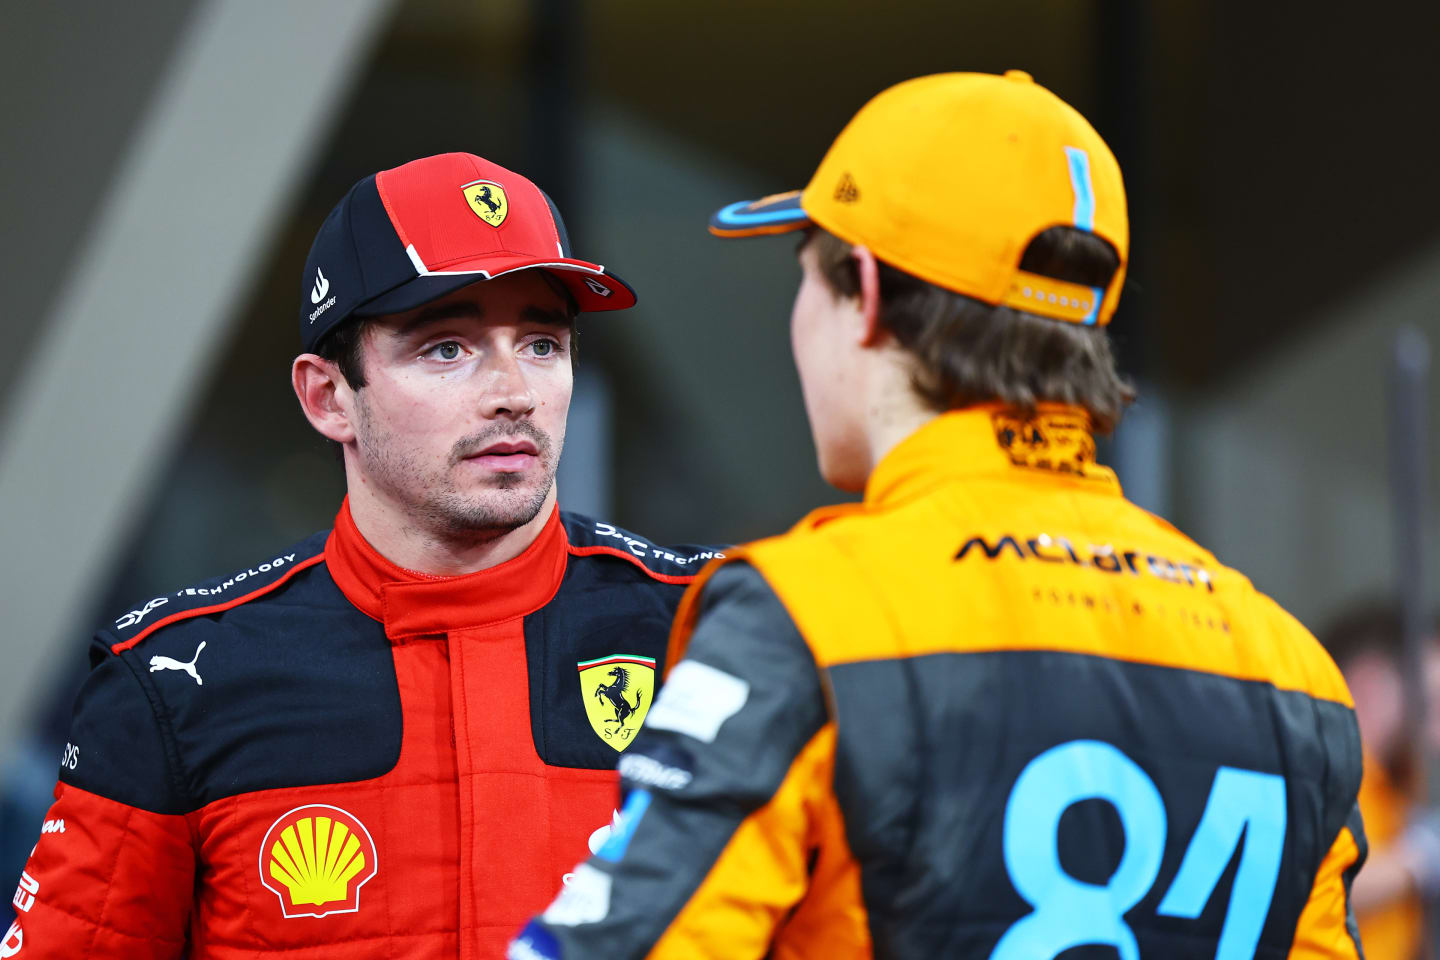 ABU DHABI, UNITED ARAB EMIRATES - NOVEMBER 25: Second placed qualifier Charles Leclerc of Monaco and Ferrari and Third placed qualifier Oscar Piastri of Australia and McLaren talk in parc ferme during qualifying ahead of the F1 Grand Prix of Abu Dhabi at Yas Marina Circuit on November 25, 2023 in Abu Dhabi, United Arab Emirates. (Photo by Mark Thompson/Getty Images)